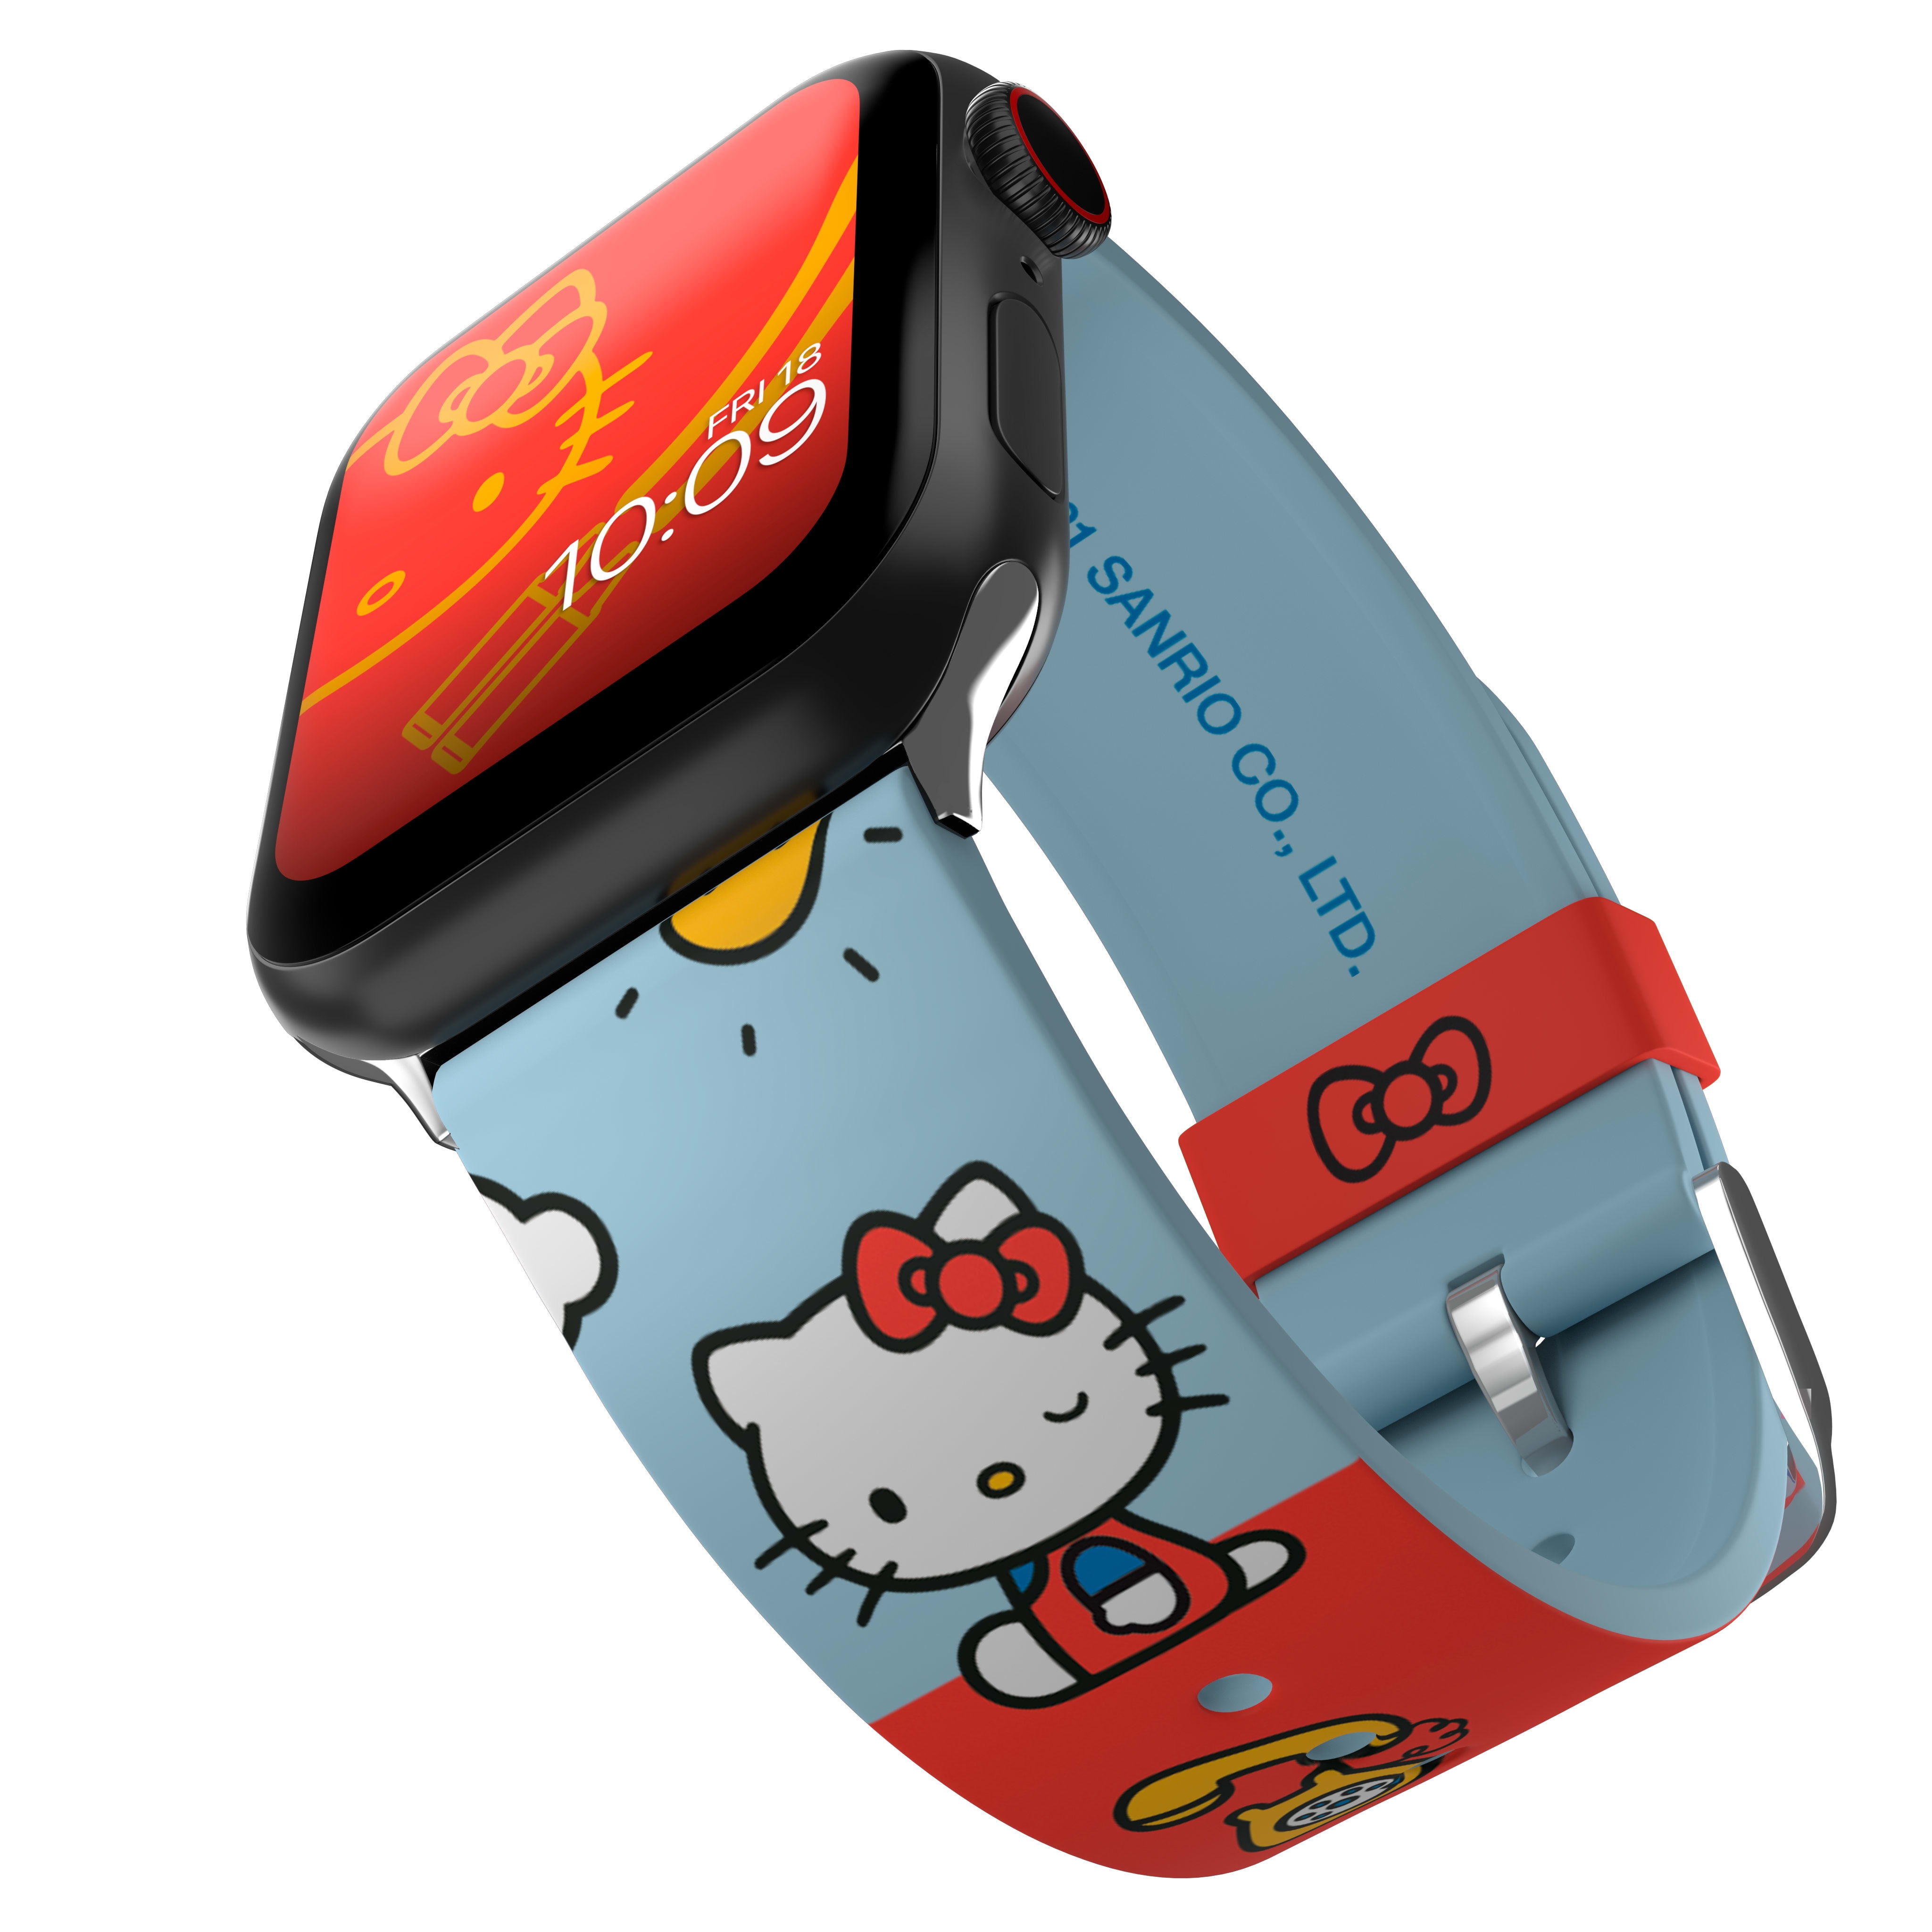 Hello Kitty Sonix Classic Black Leather Watch Band